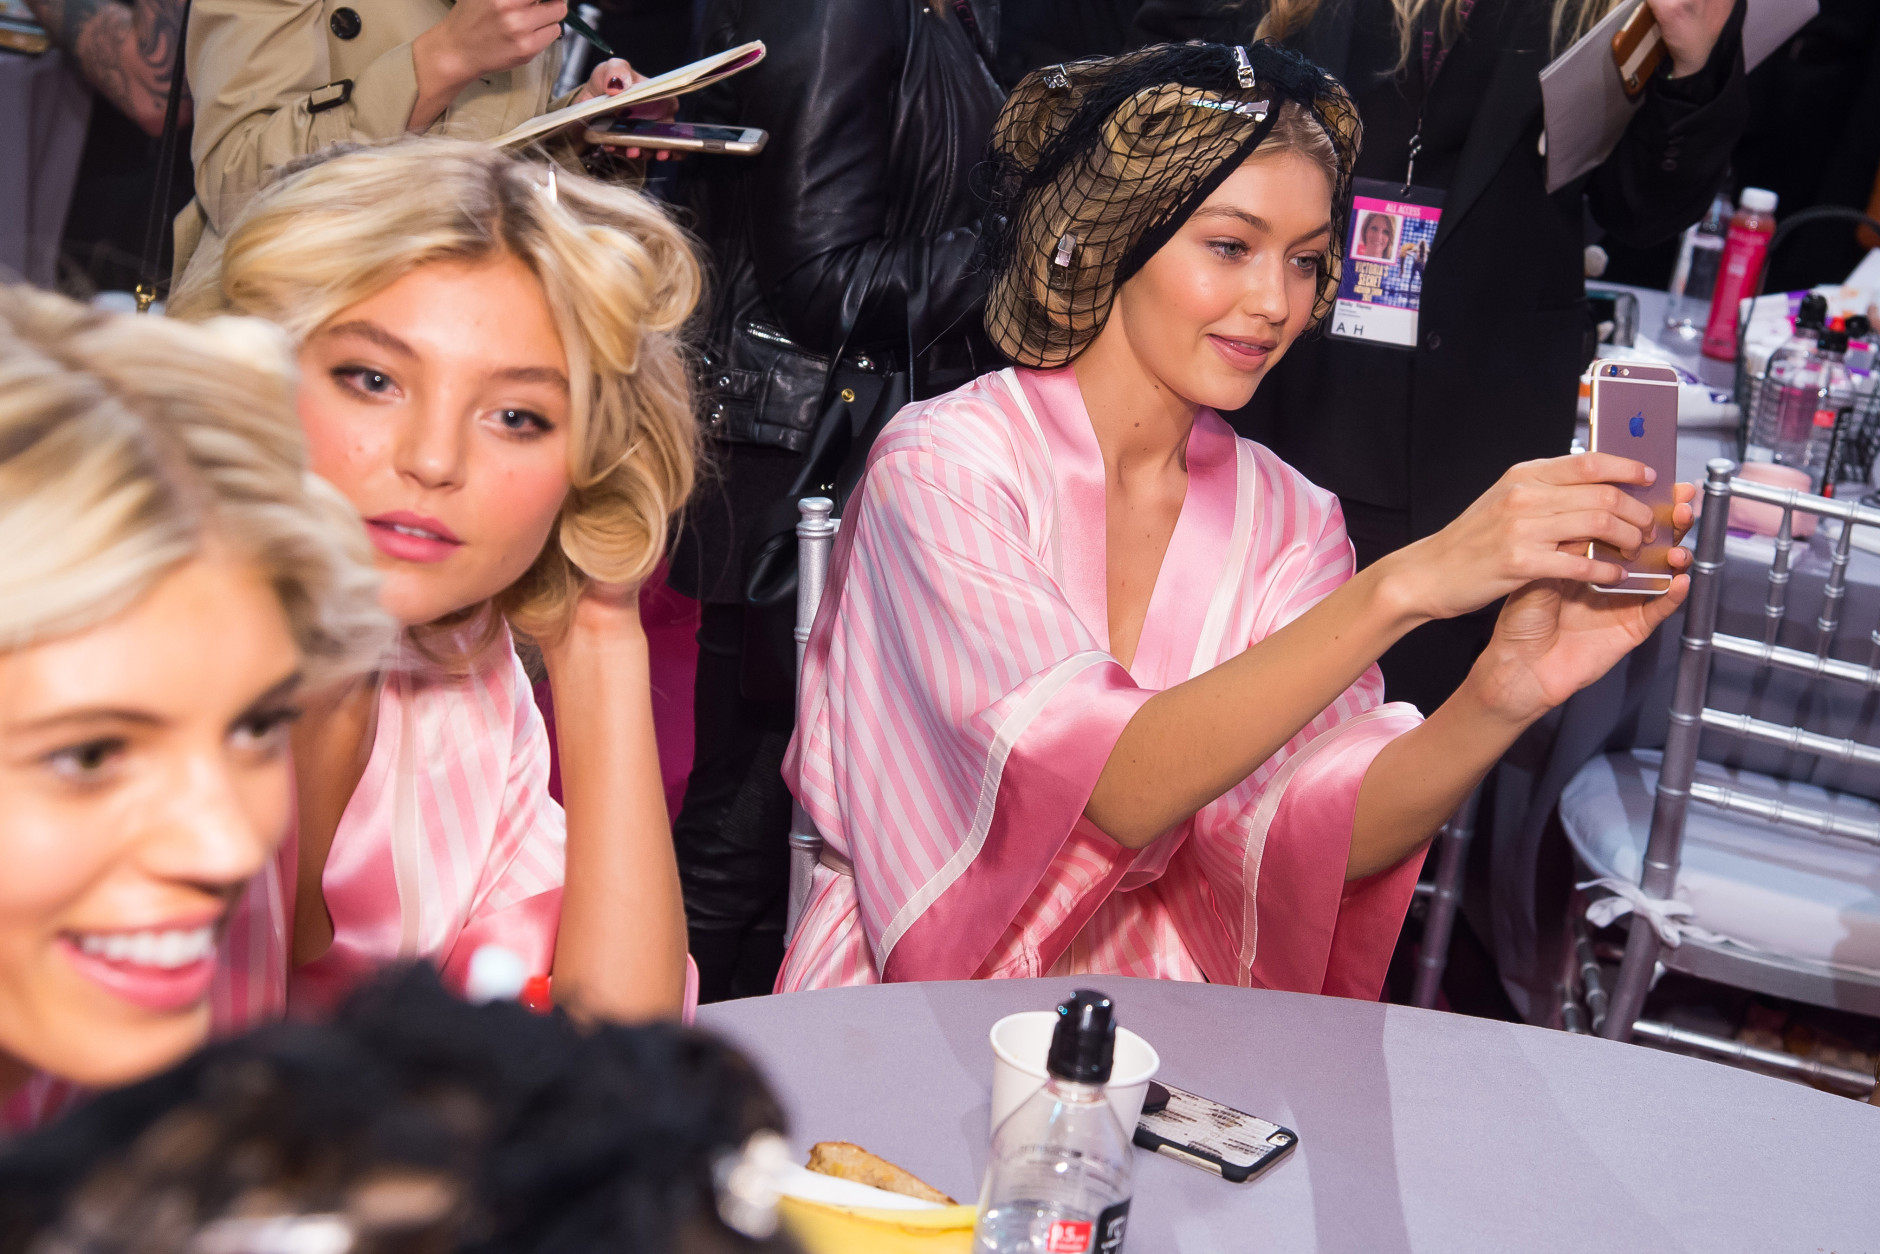 Gigi Hadid appears backstage in hair and makeup at the 2015 Victoria Secret Fashion Show at the Lexington Armory on Tuesday, Nov. 10, 2015, in New York. The Victorias Secret Fashion Show will air on CBS on Tuesday, December 8th at 10pm EST. (Photo by Charles Sykes/Invision/AP)